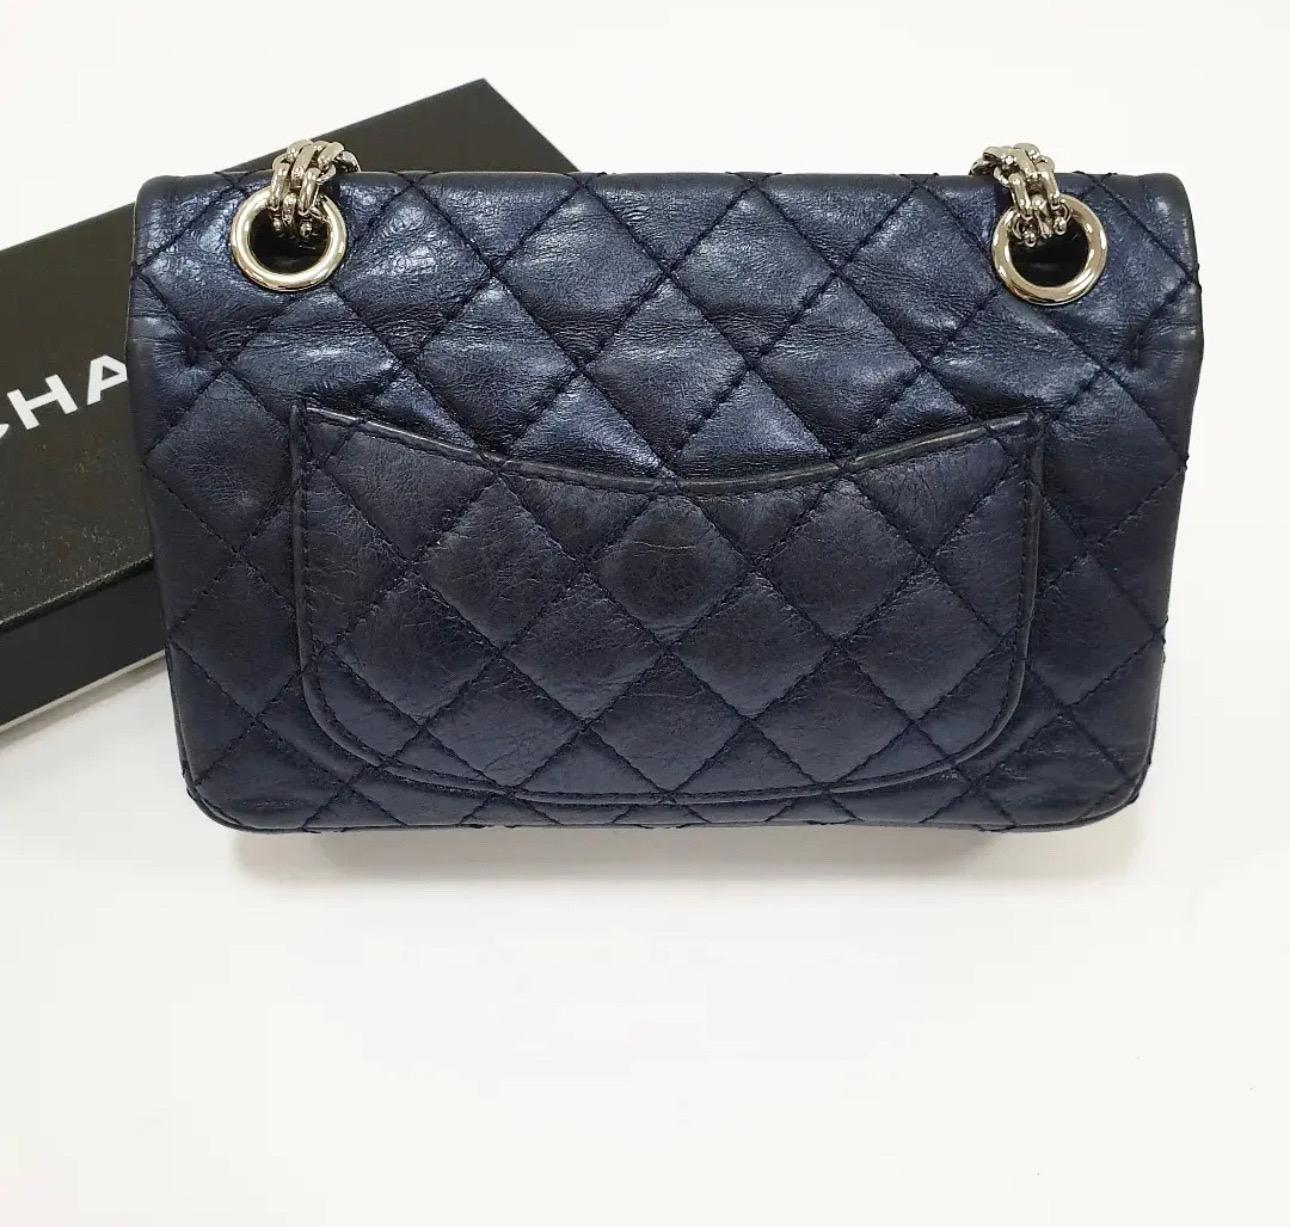 Chanel Metallic Blue Quilted Leather Reissue 2.55 Classic Flap Bag 3